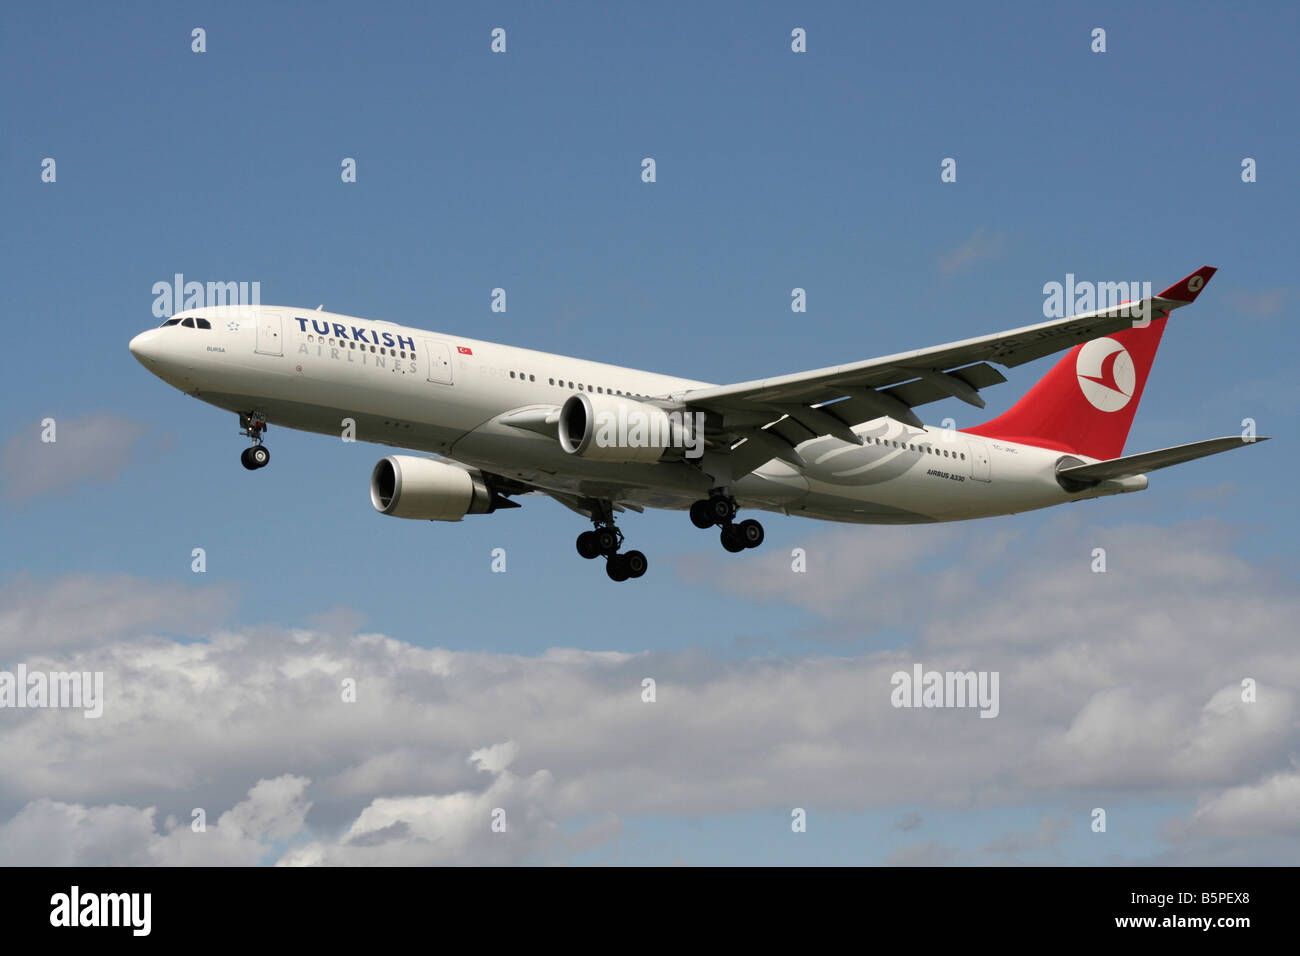 Turkish Airlines Airbus A330-200 widebody airliner on arrival Stock Photo